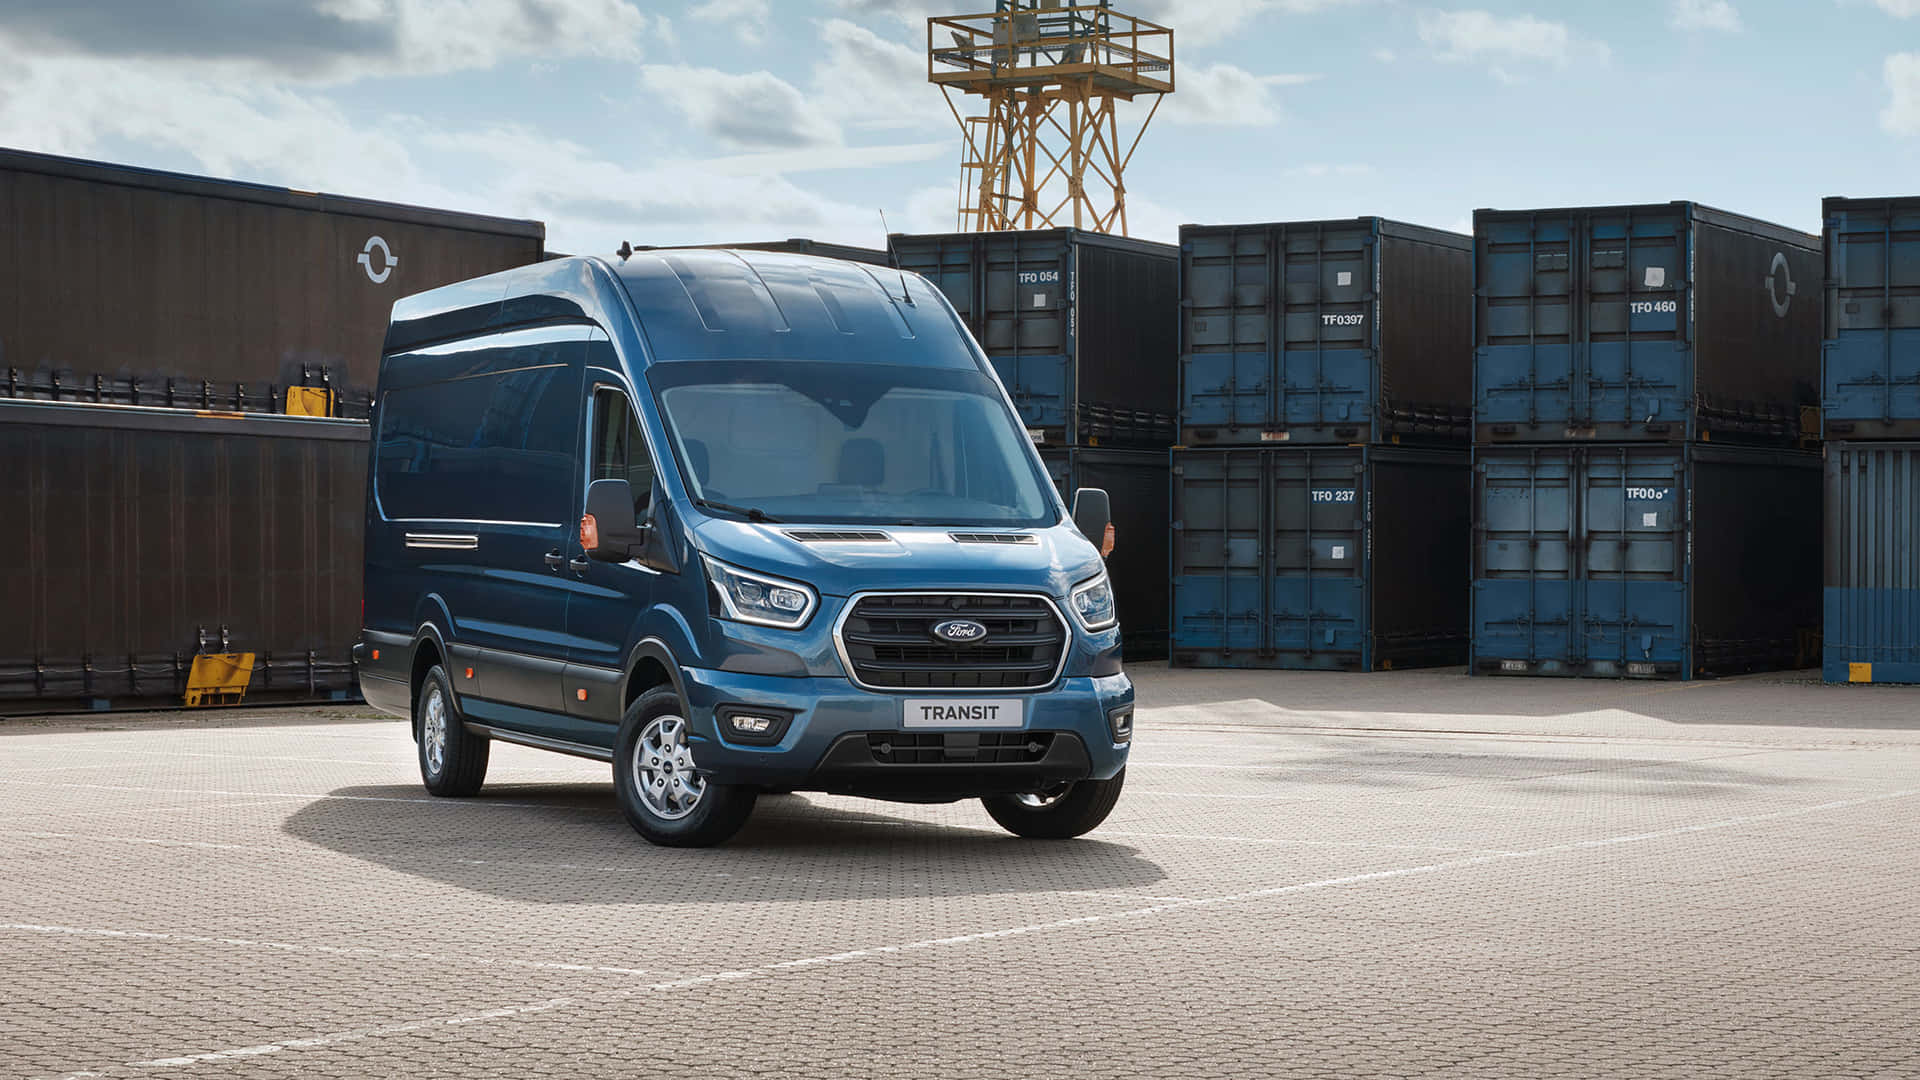 Captivating Ford Transit on a Picturesque Road Wallpaper